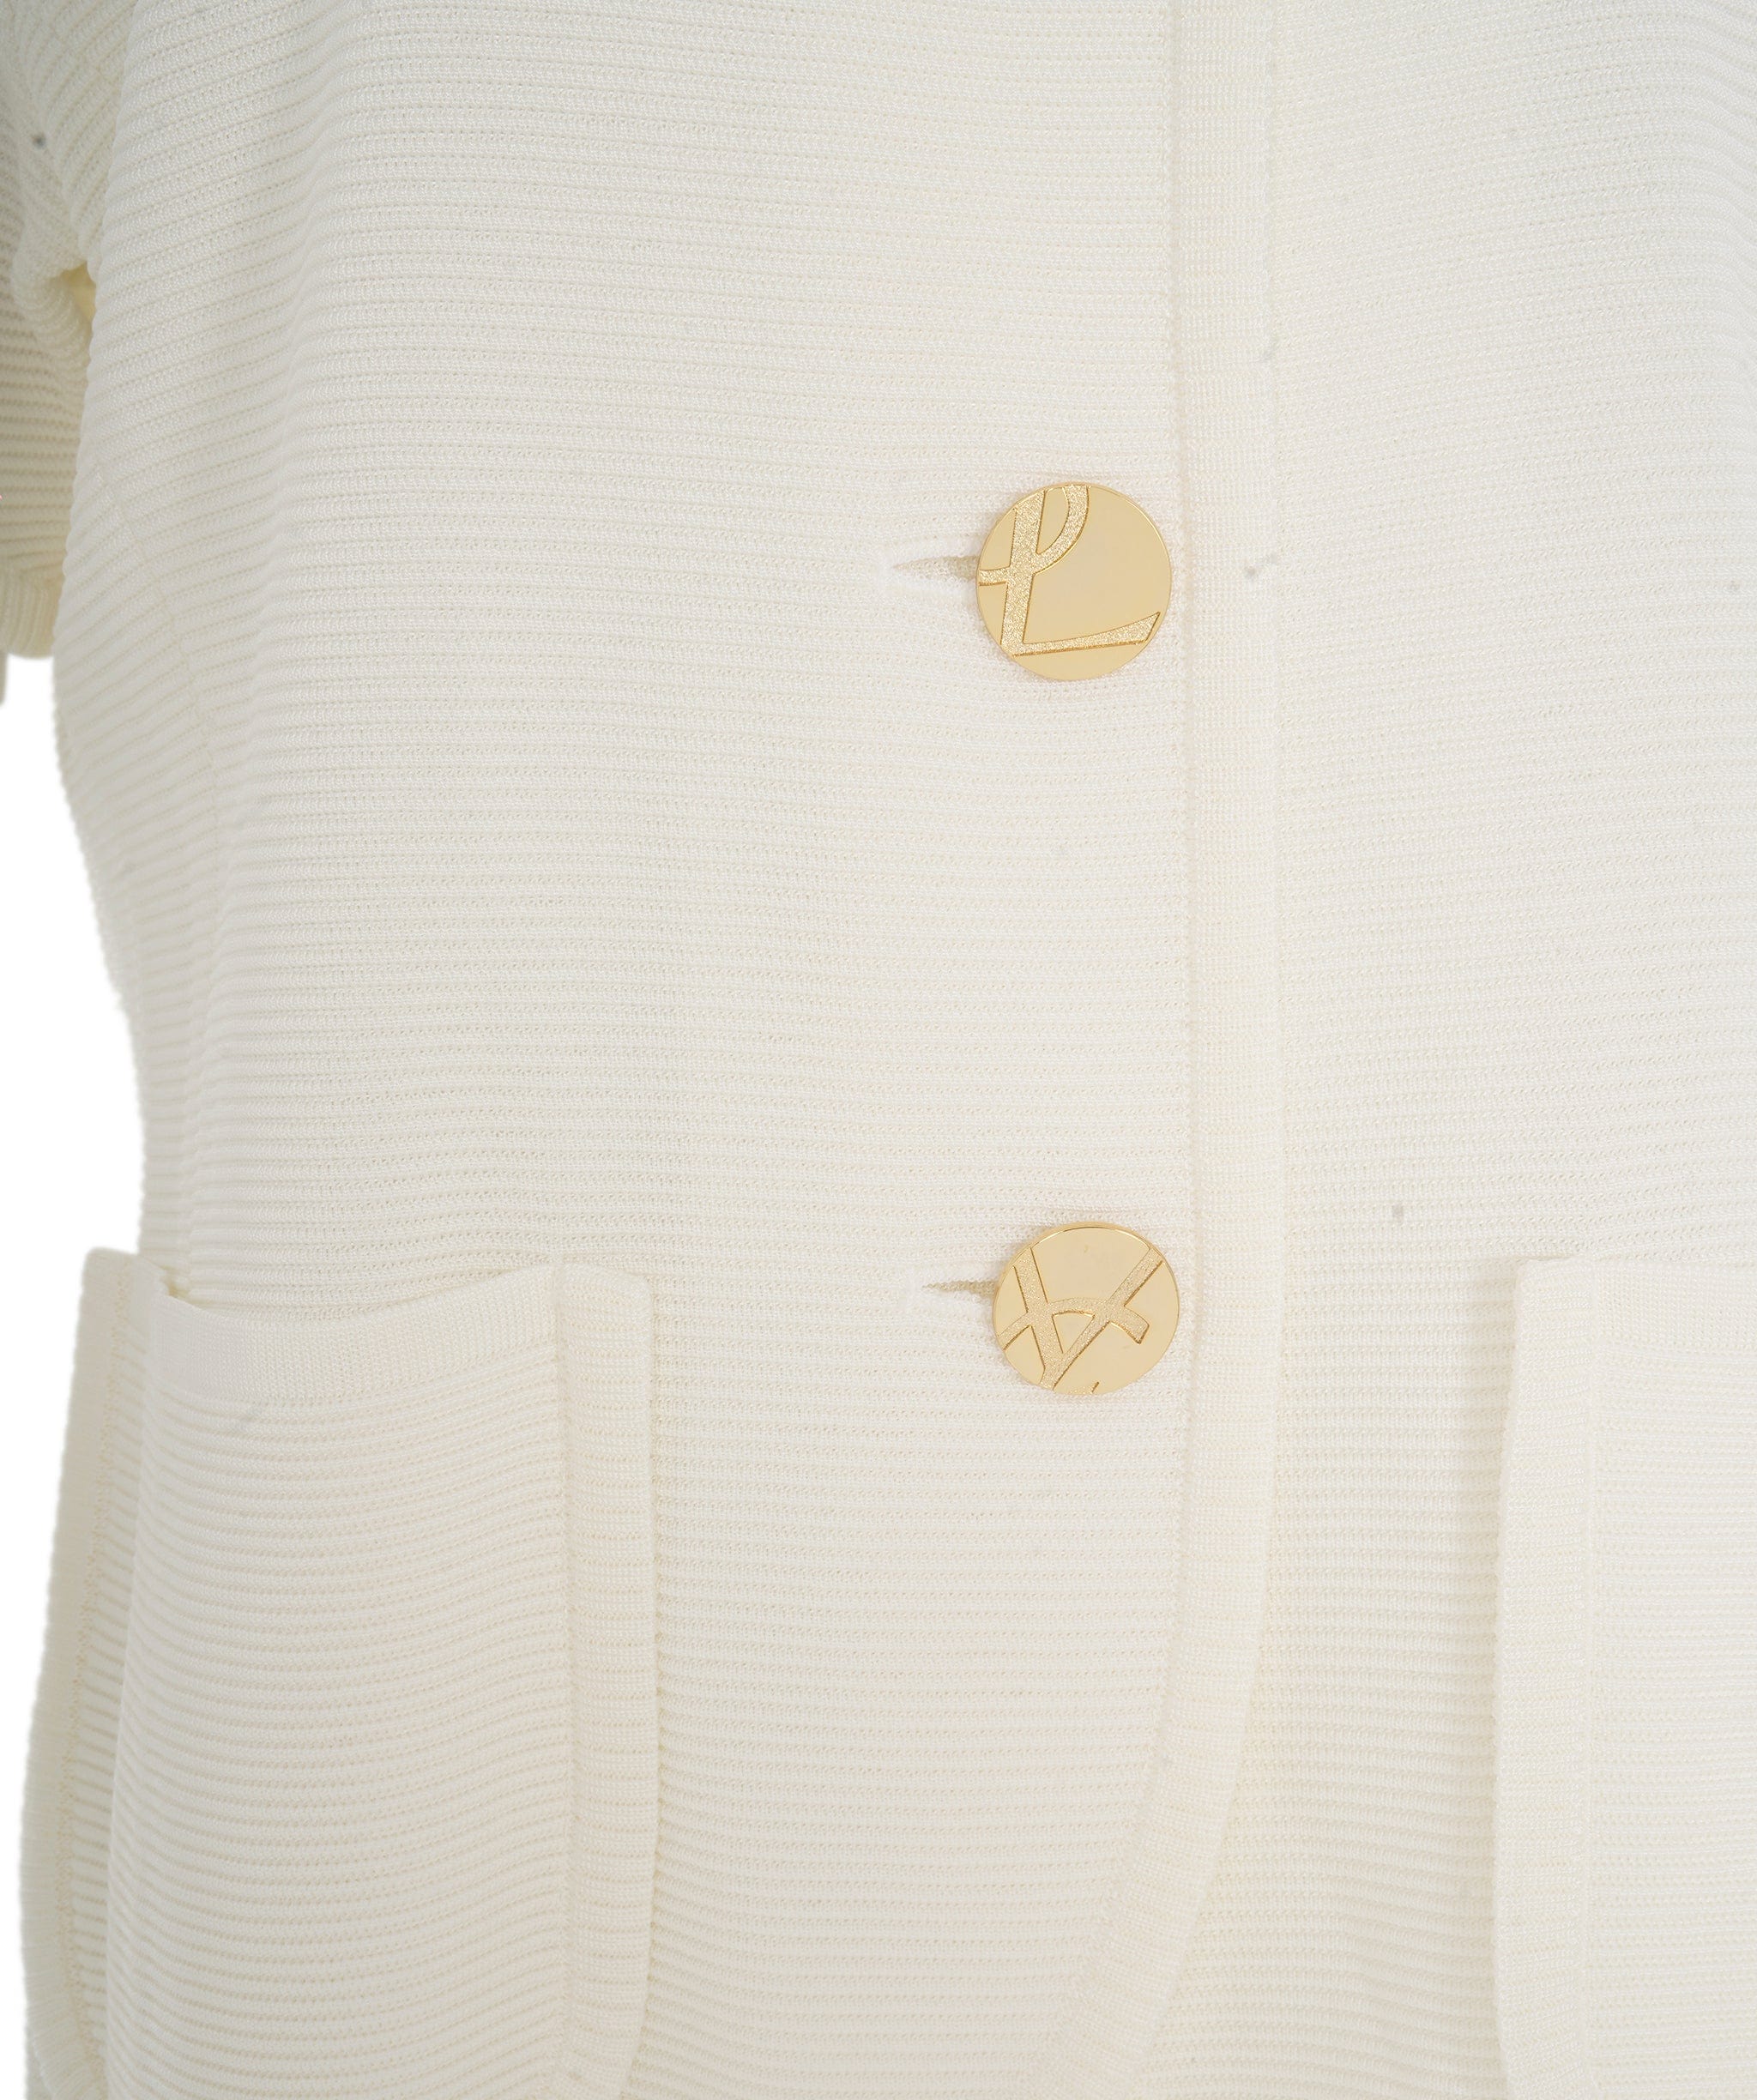 Yves Saint Laurent YSL Gold Buttons Knit Cardigan White ASL10500